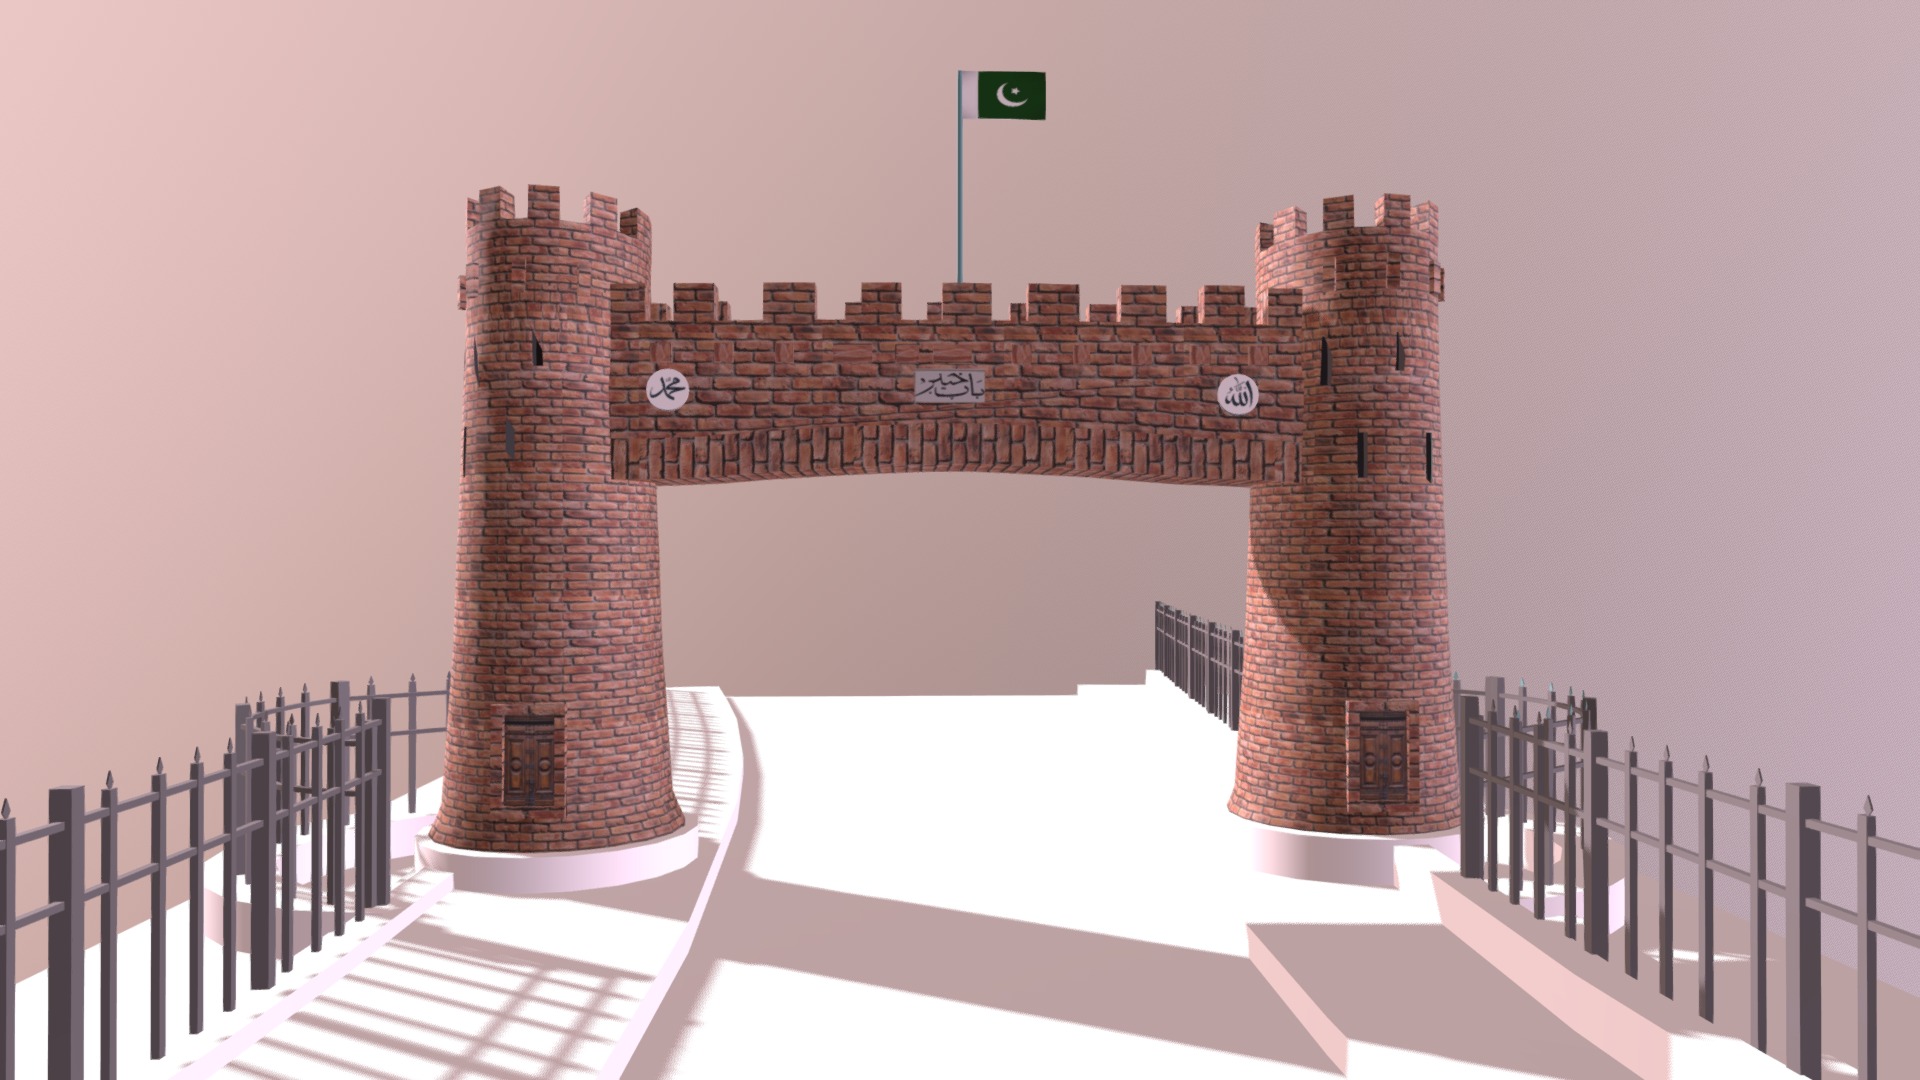 The Khyber Pass is a mountain pass in the northwest of Pakistan, on the border with Afghanistan. in Autodesk maya - Khyber pass - 3D model by GhulamRasool (@Ghulam.Rasool.Blouch) 3d model